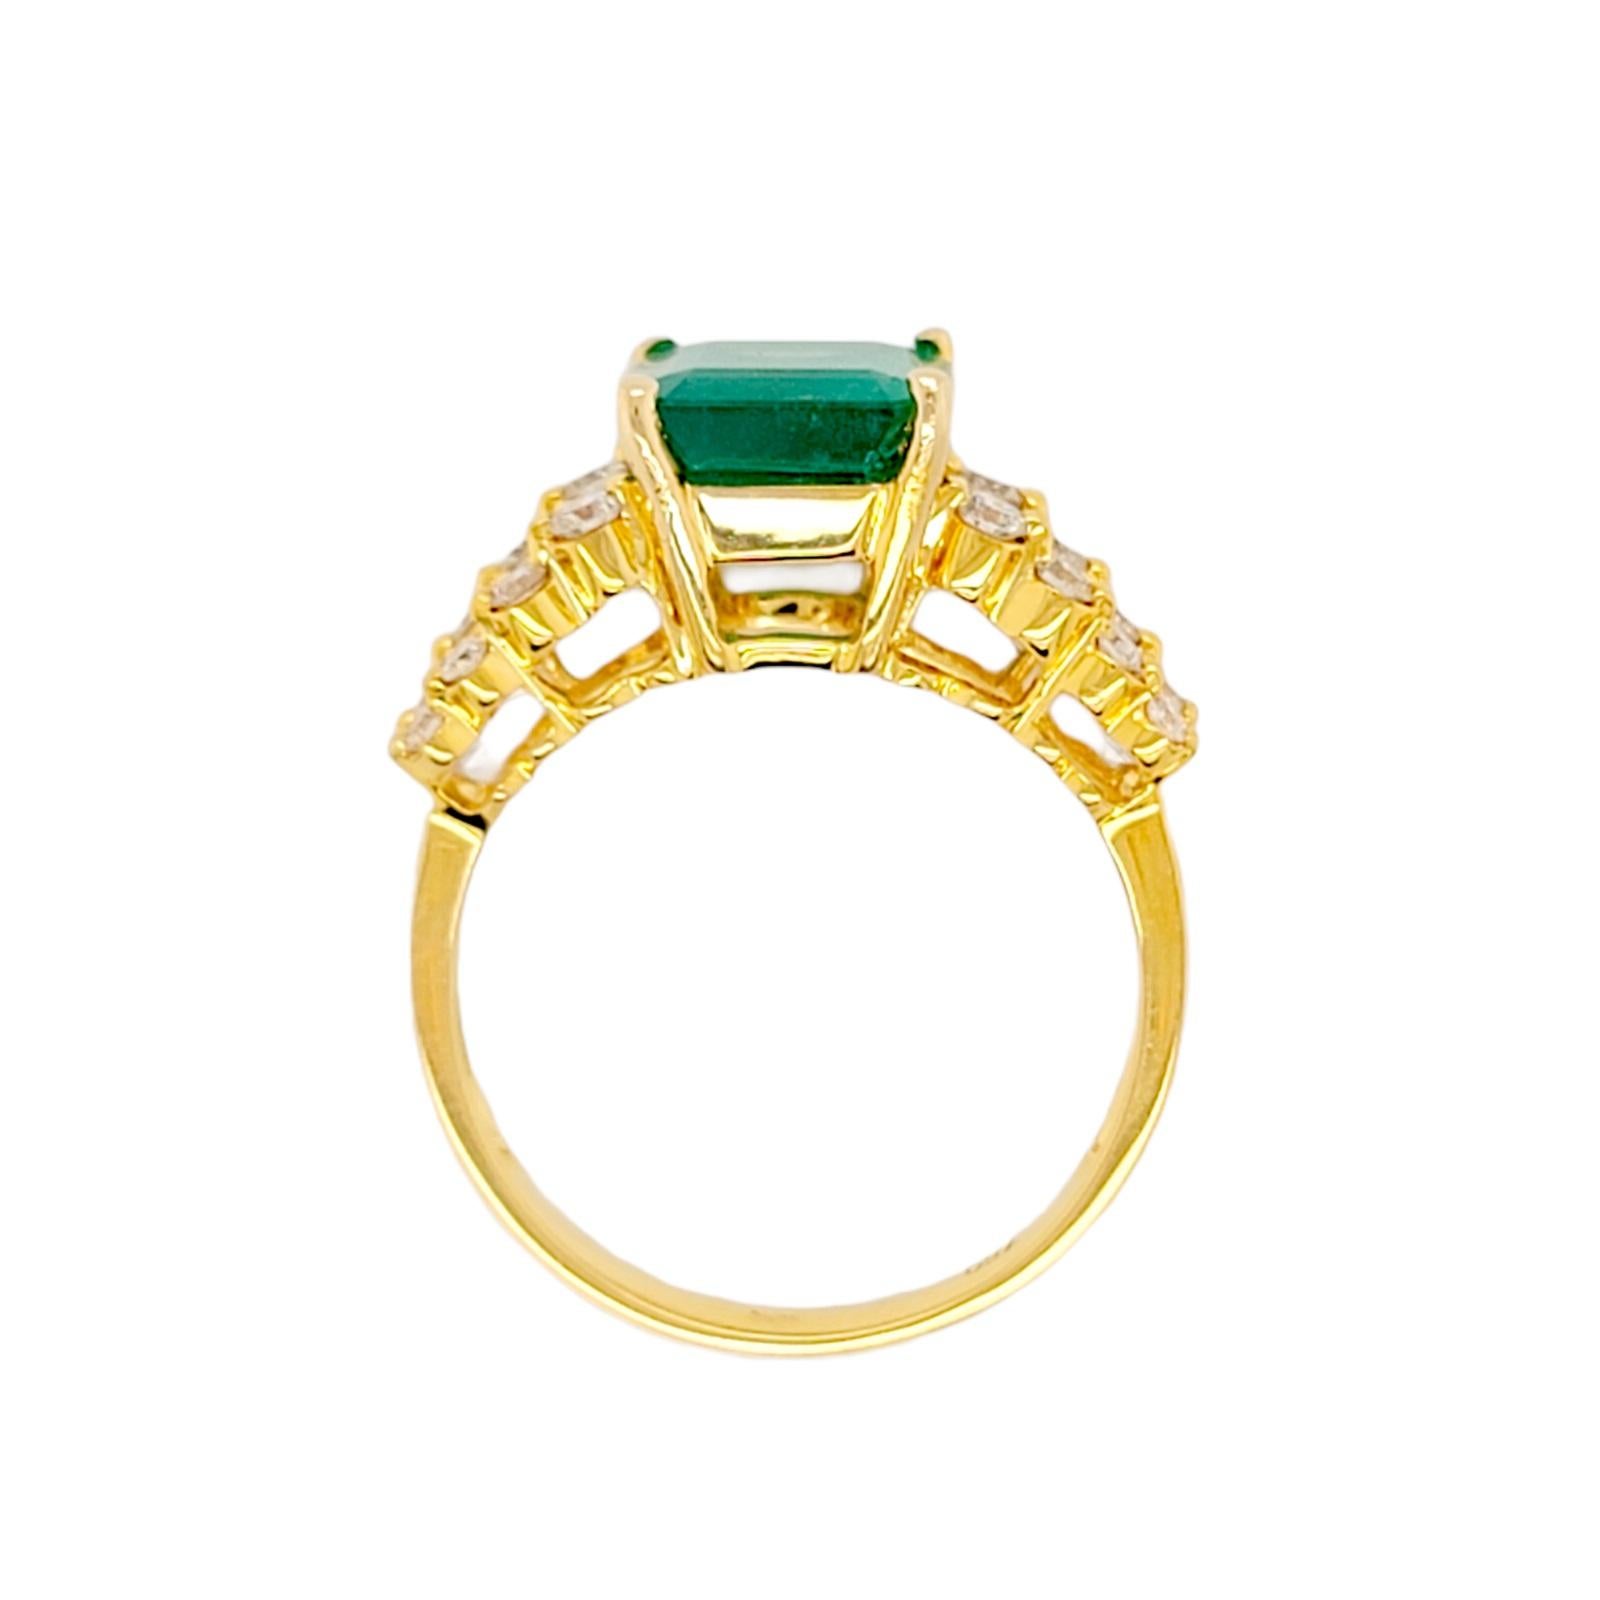 2.58 Ct Zambian Emerald & 1.03 Ct Diamonds in 18k Yellow Gold Engagement Ring For Sale 1